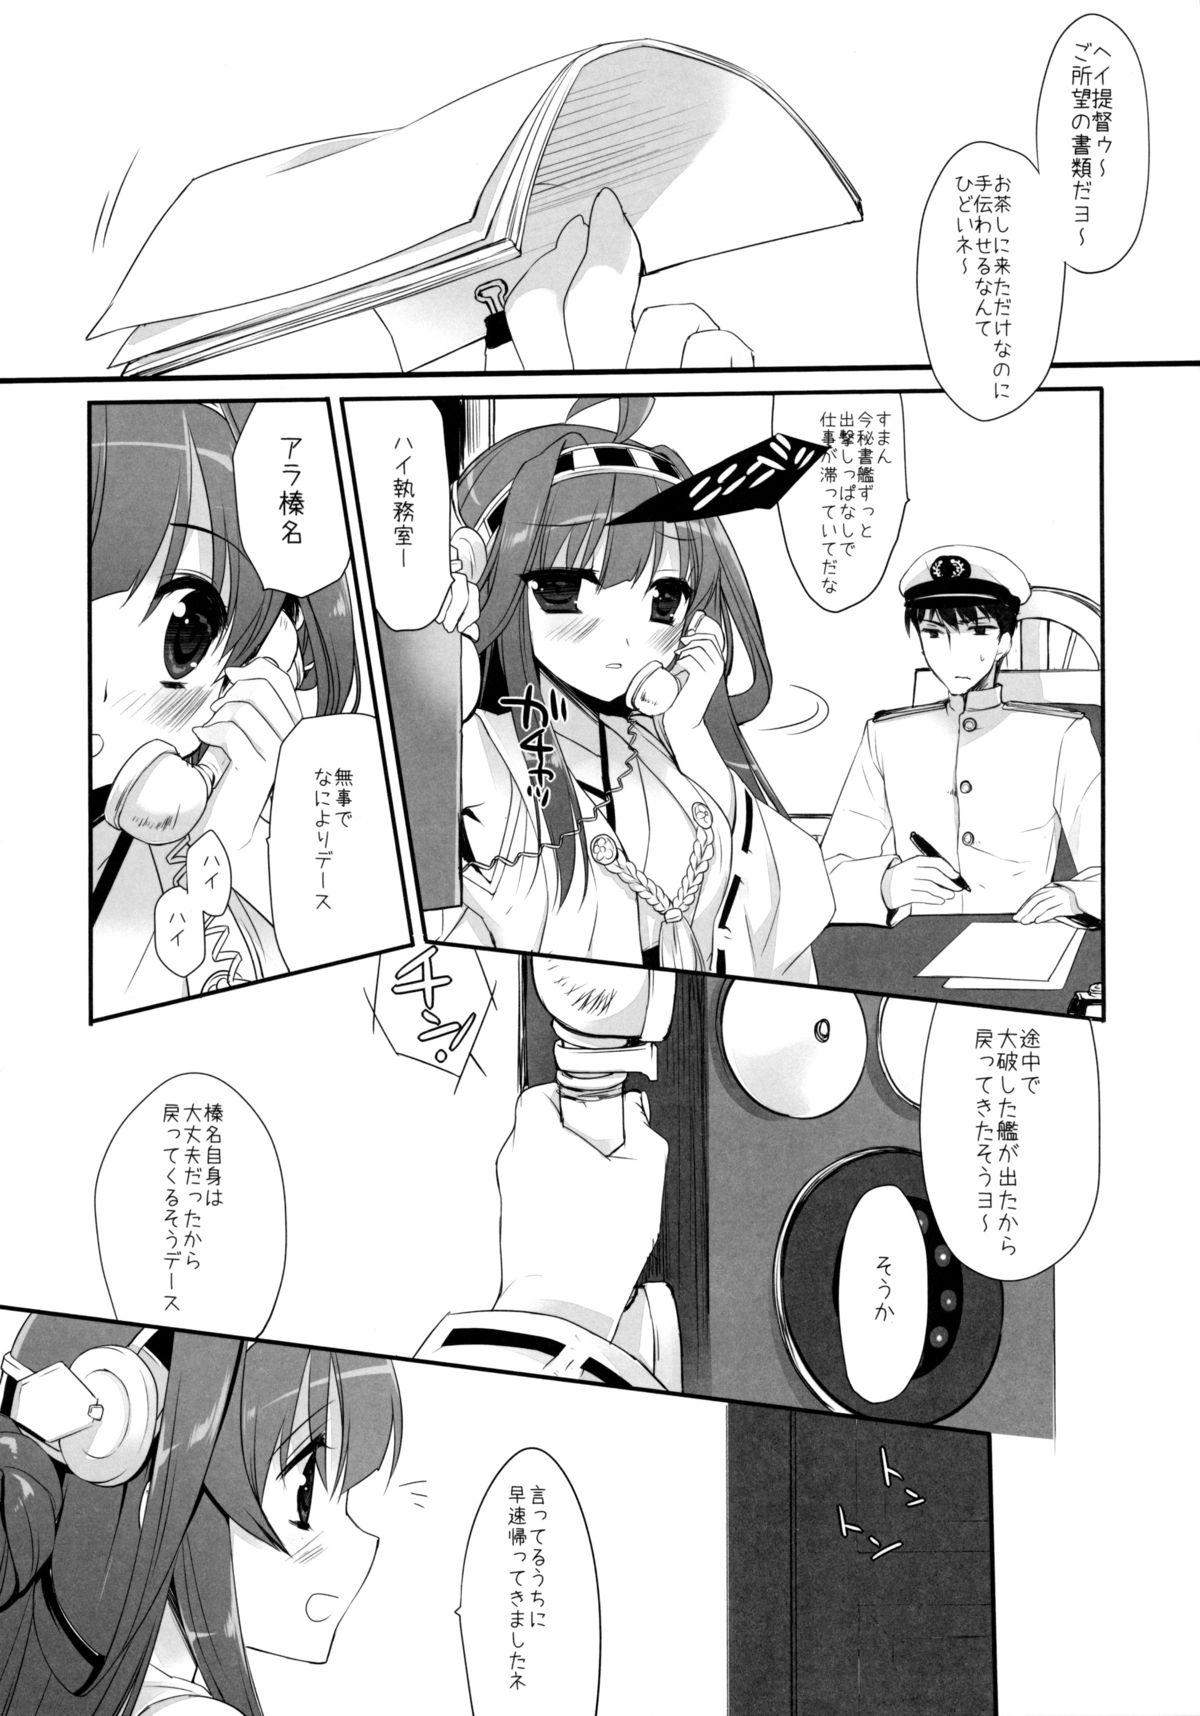 Behind TENDER - Kantai collection Reality Porn - Page 5